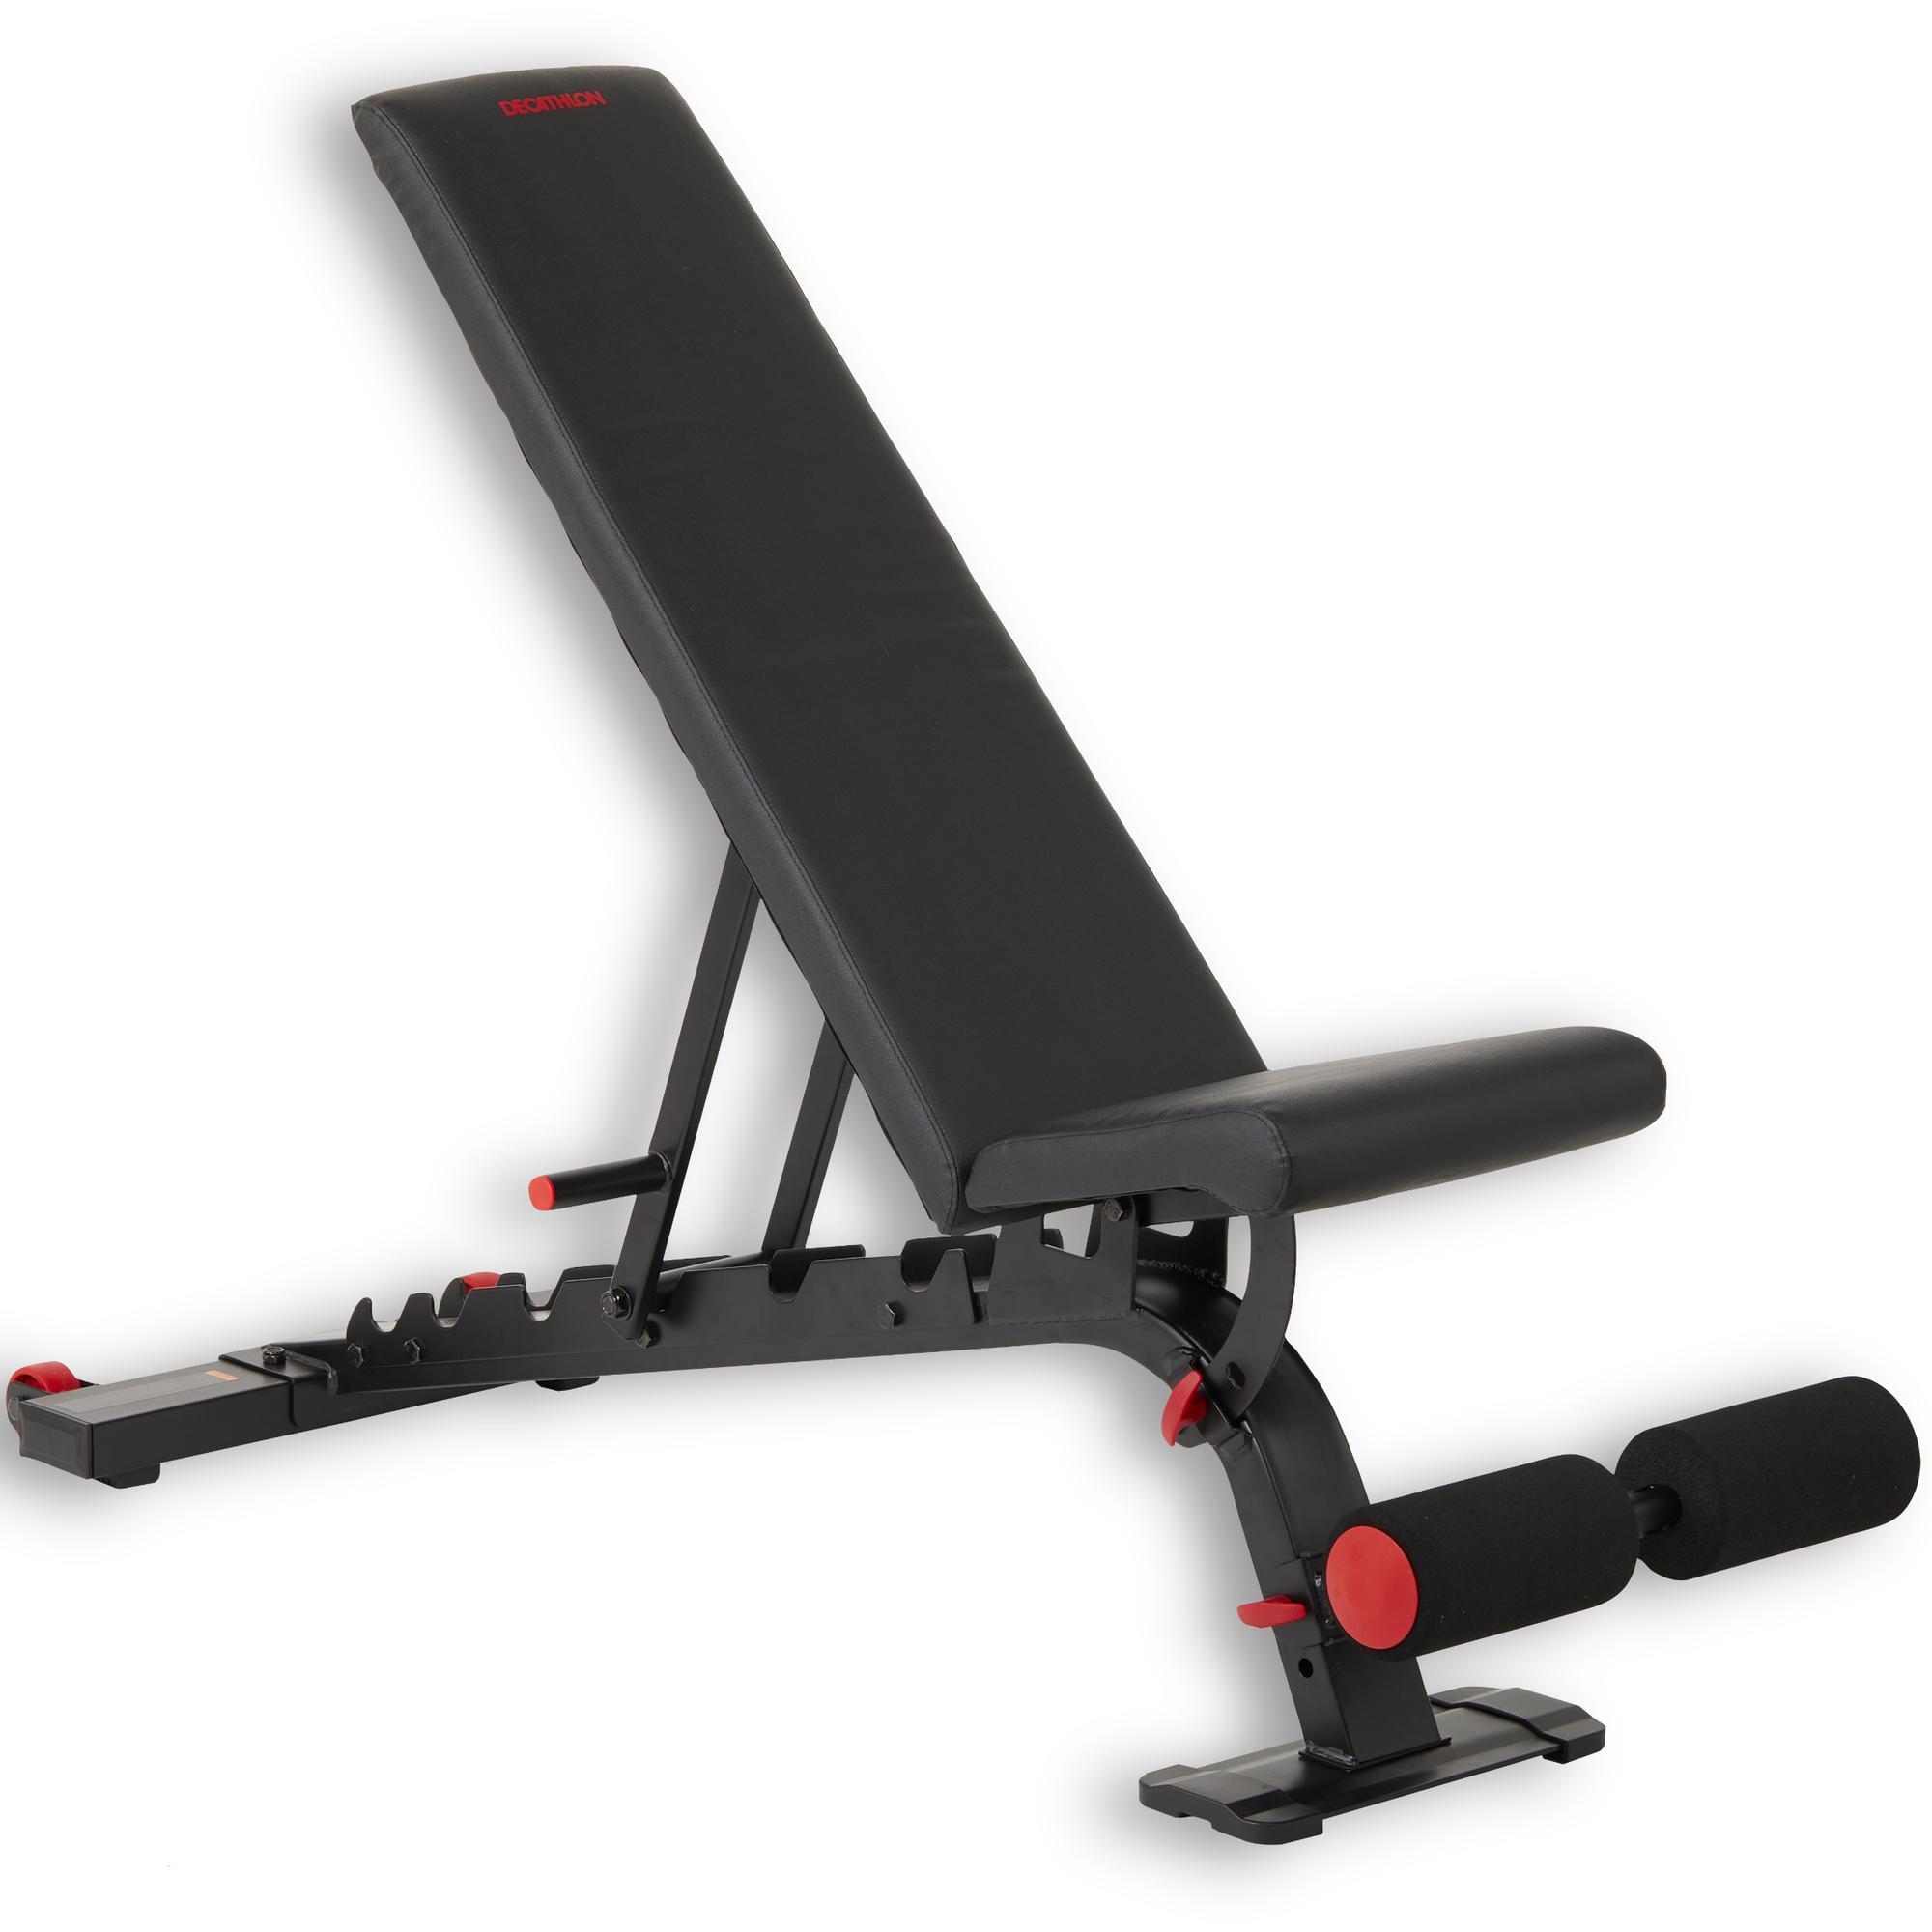 Reinforced Flat Inclined Weights Bench Domyos Decathlon